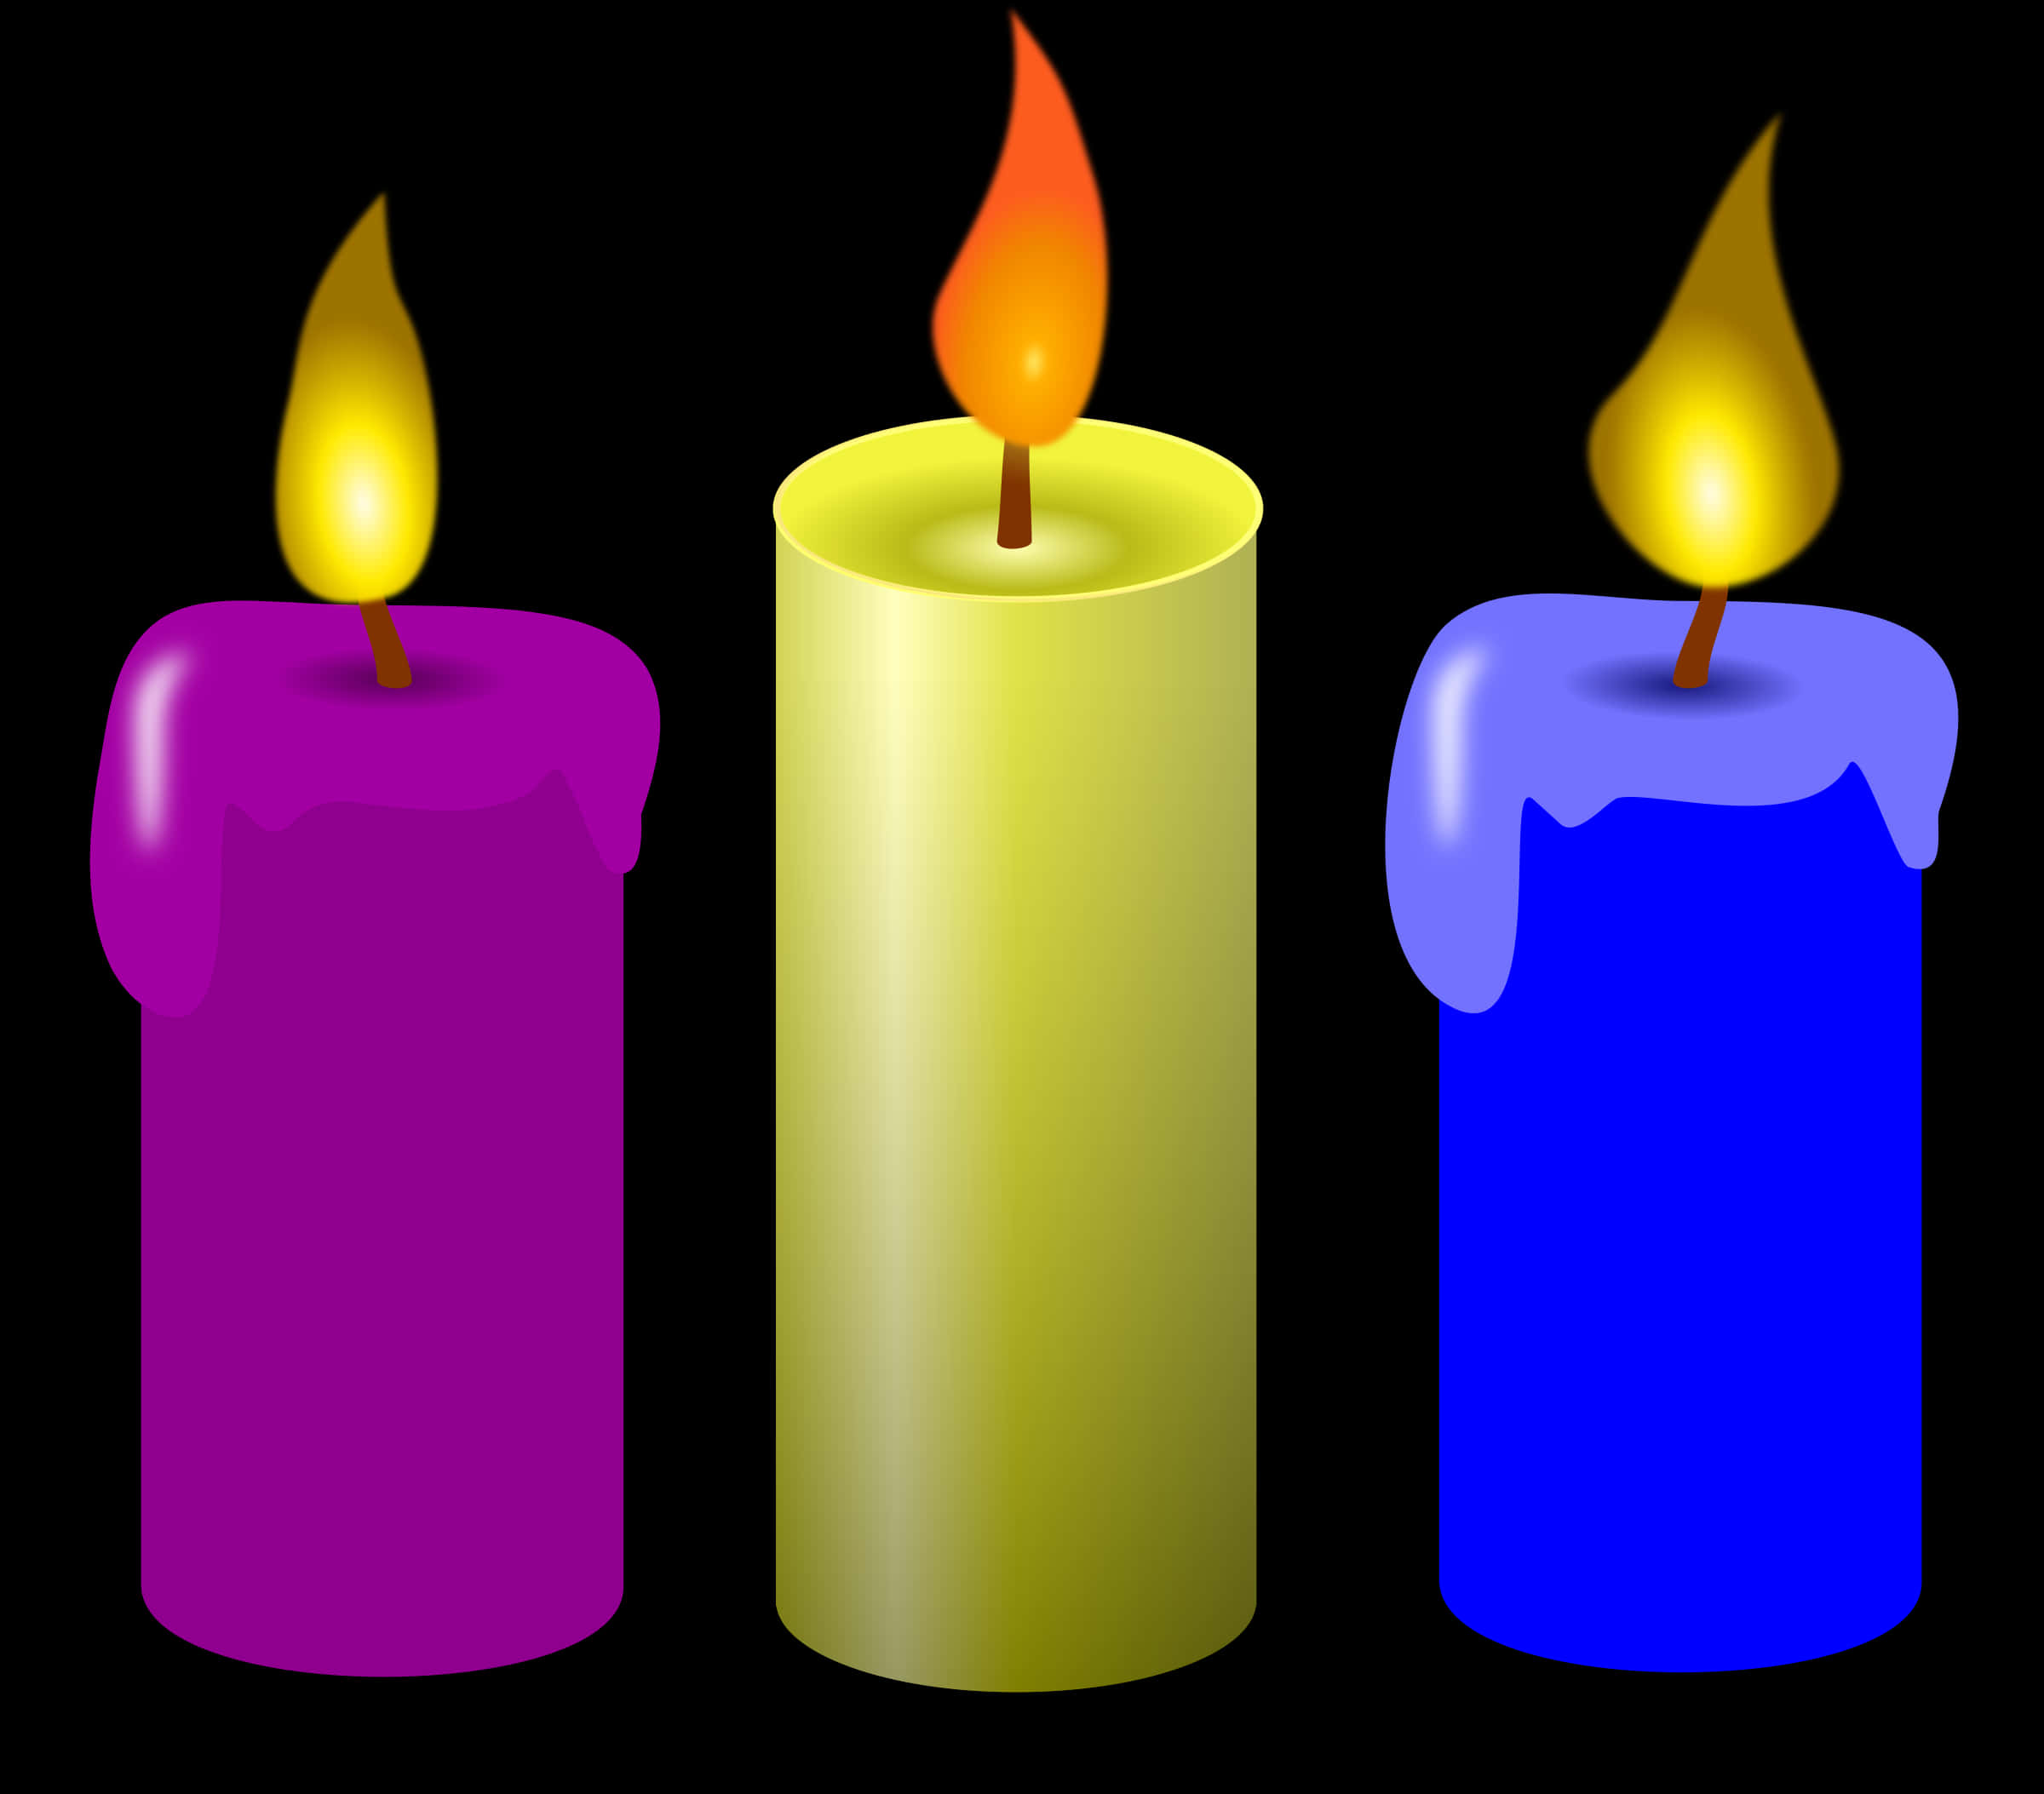 Colorful Candles Illustration PNG